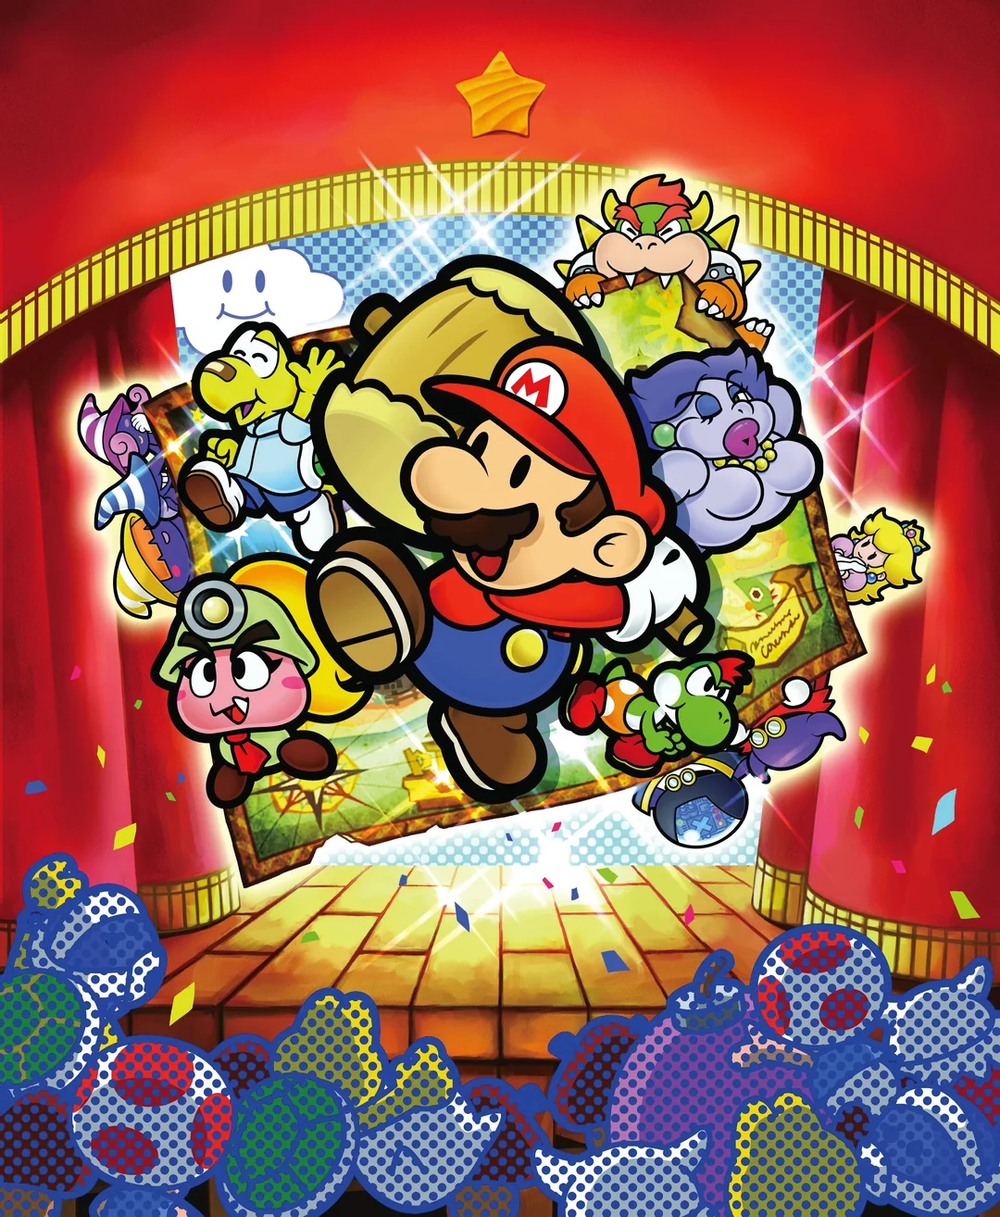 Paper Mario: The Thousand-Year Door (Video Game) - TV Tropes